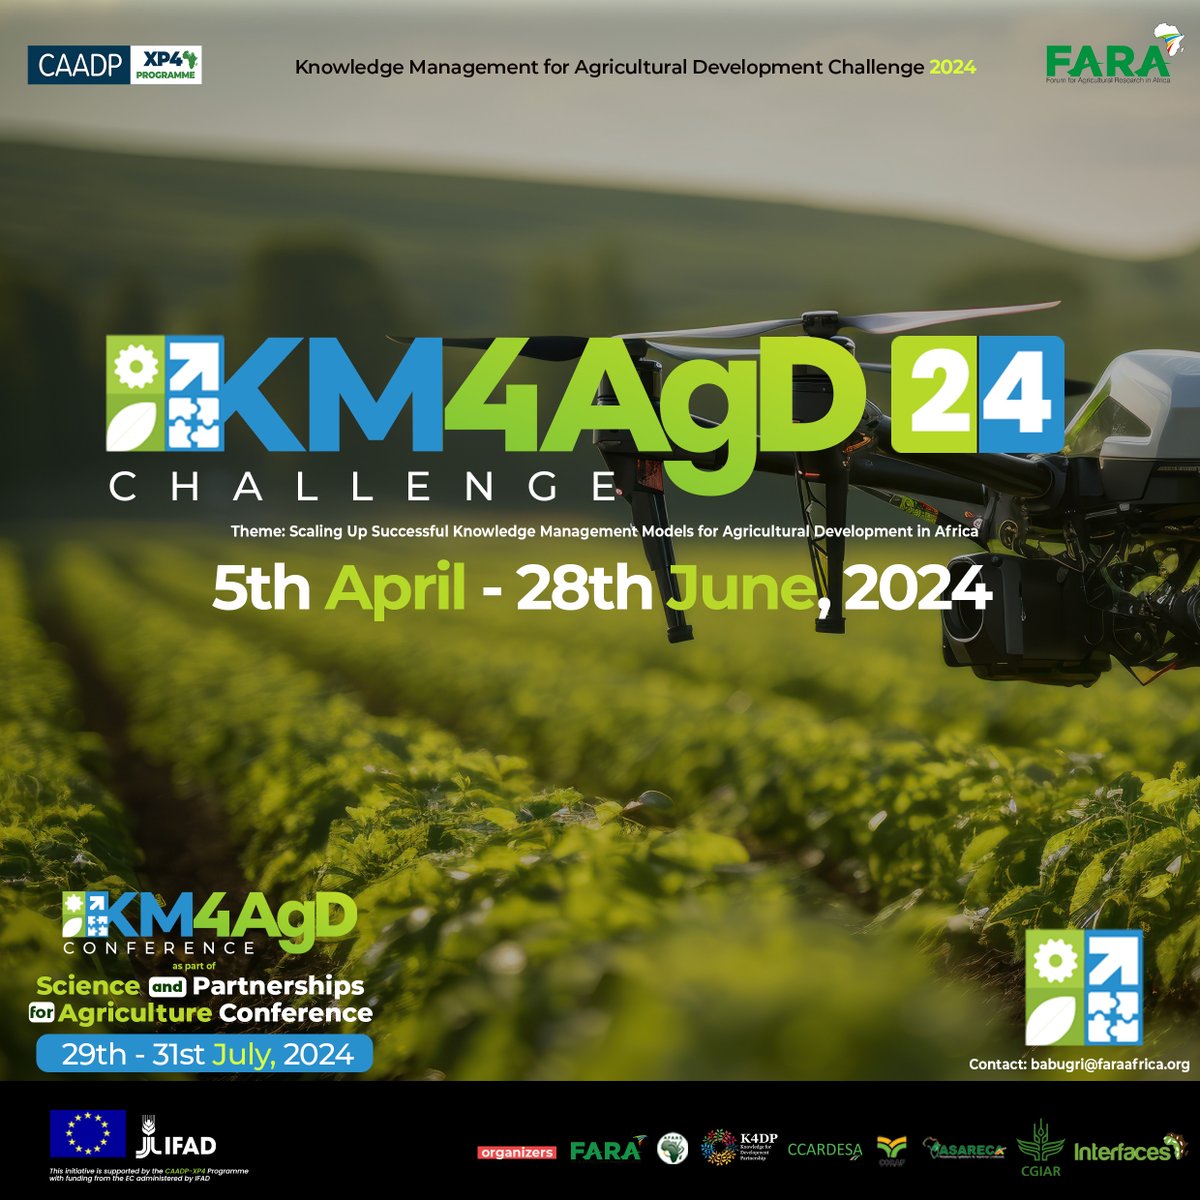 The Knowledge Management for Agricultural Development #KM4AgD Challenge 2024 kicks off April 5th The challenge aims at scaling up Knowledge Management Models for Agricultural Development in Africa. Further details on #KM4AgD Challenge & Kick-off Meeting to be announced #SPAC2024